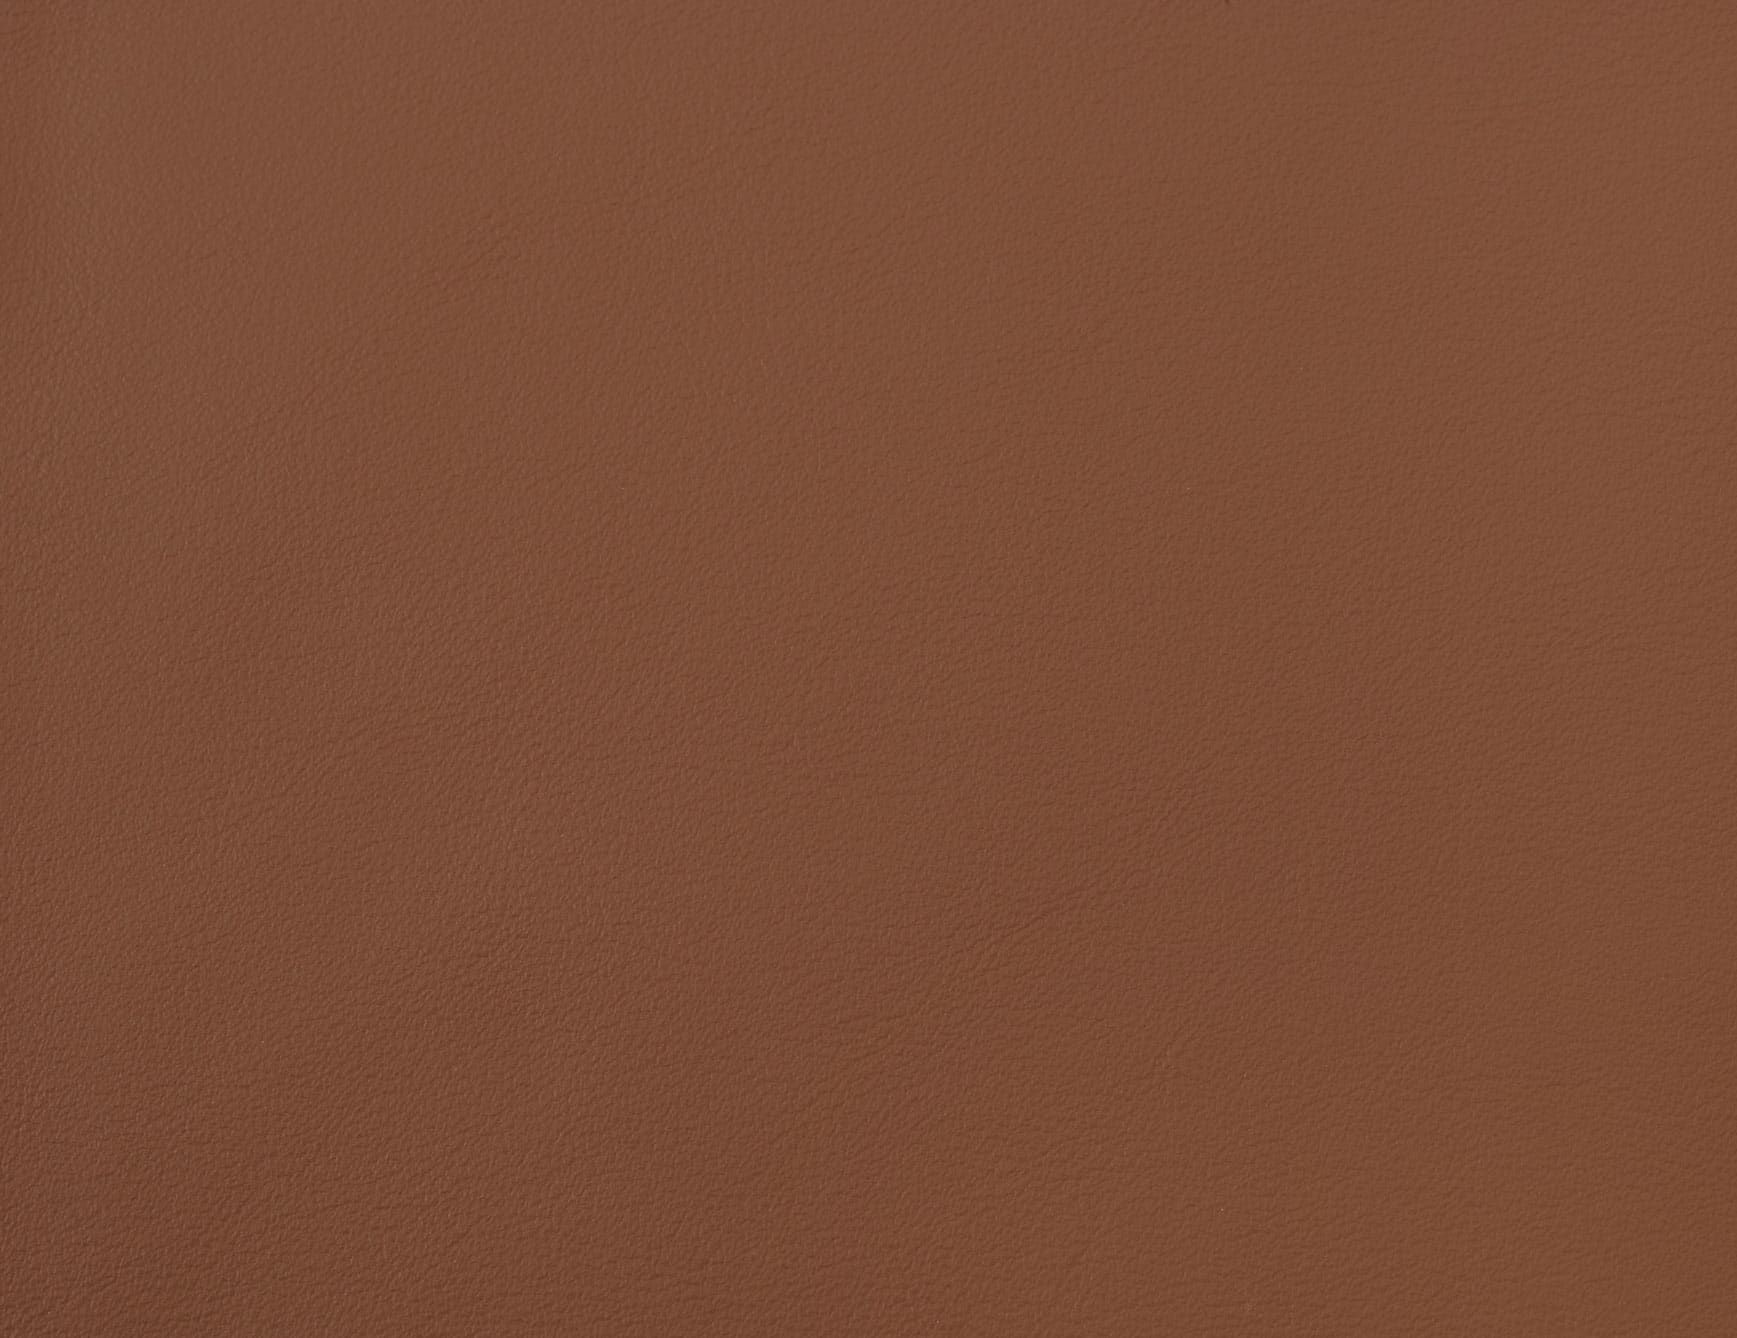 Tabacco contemporary Italian upholstery leather in brown